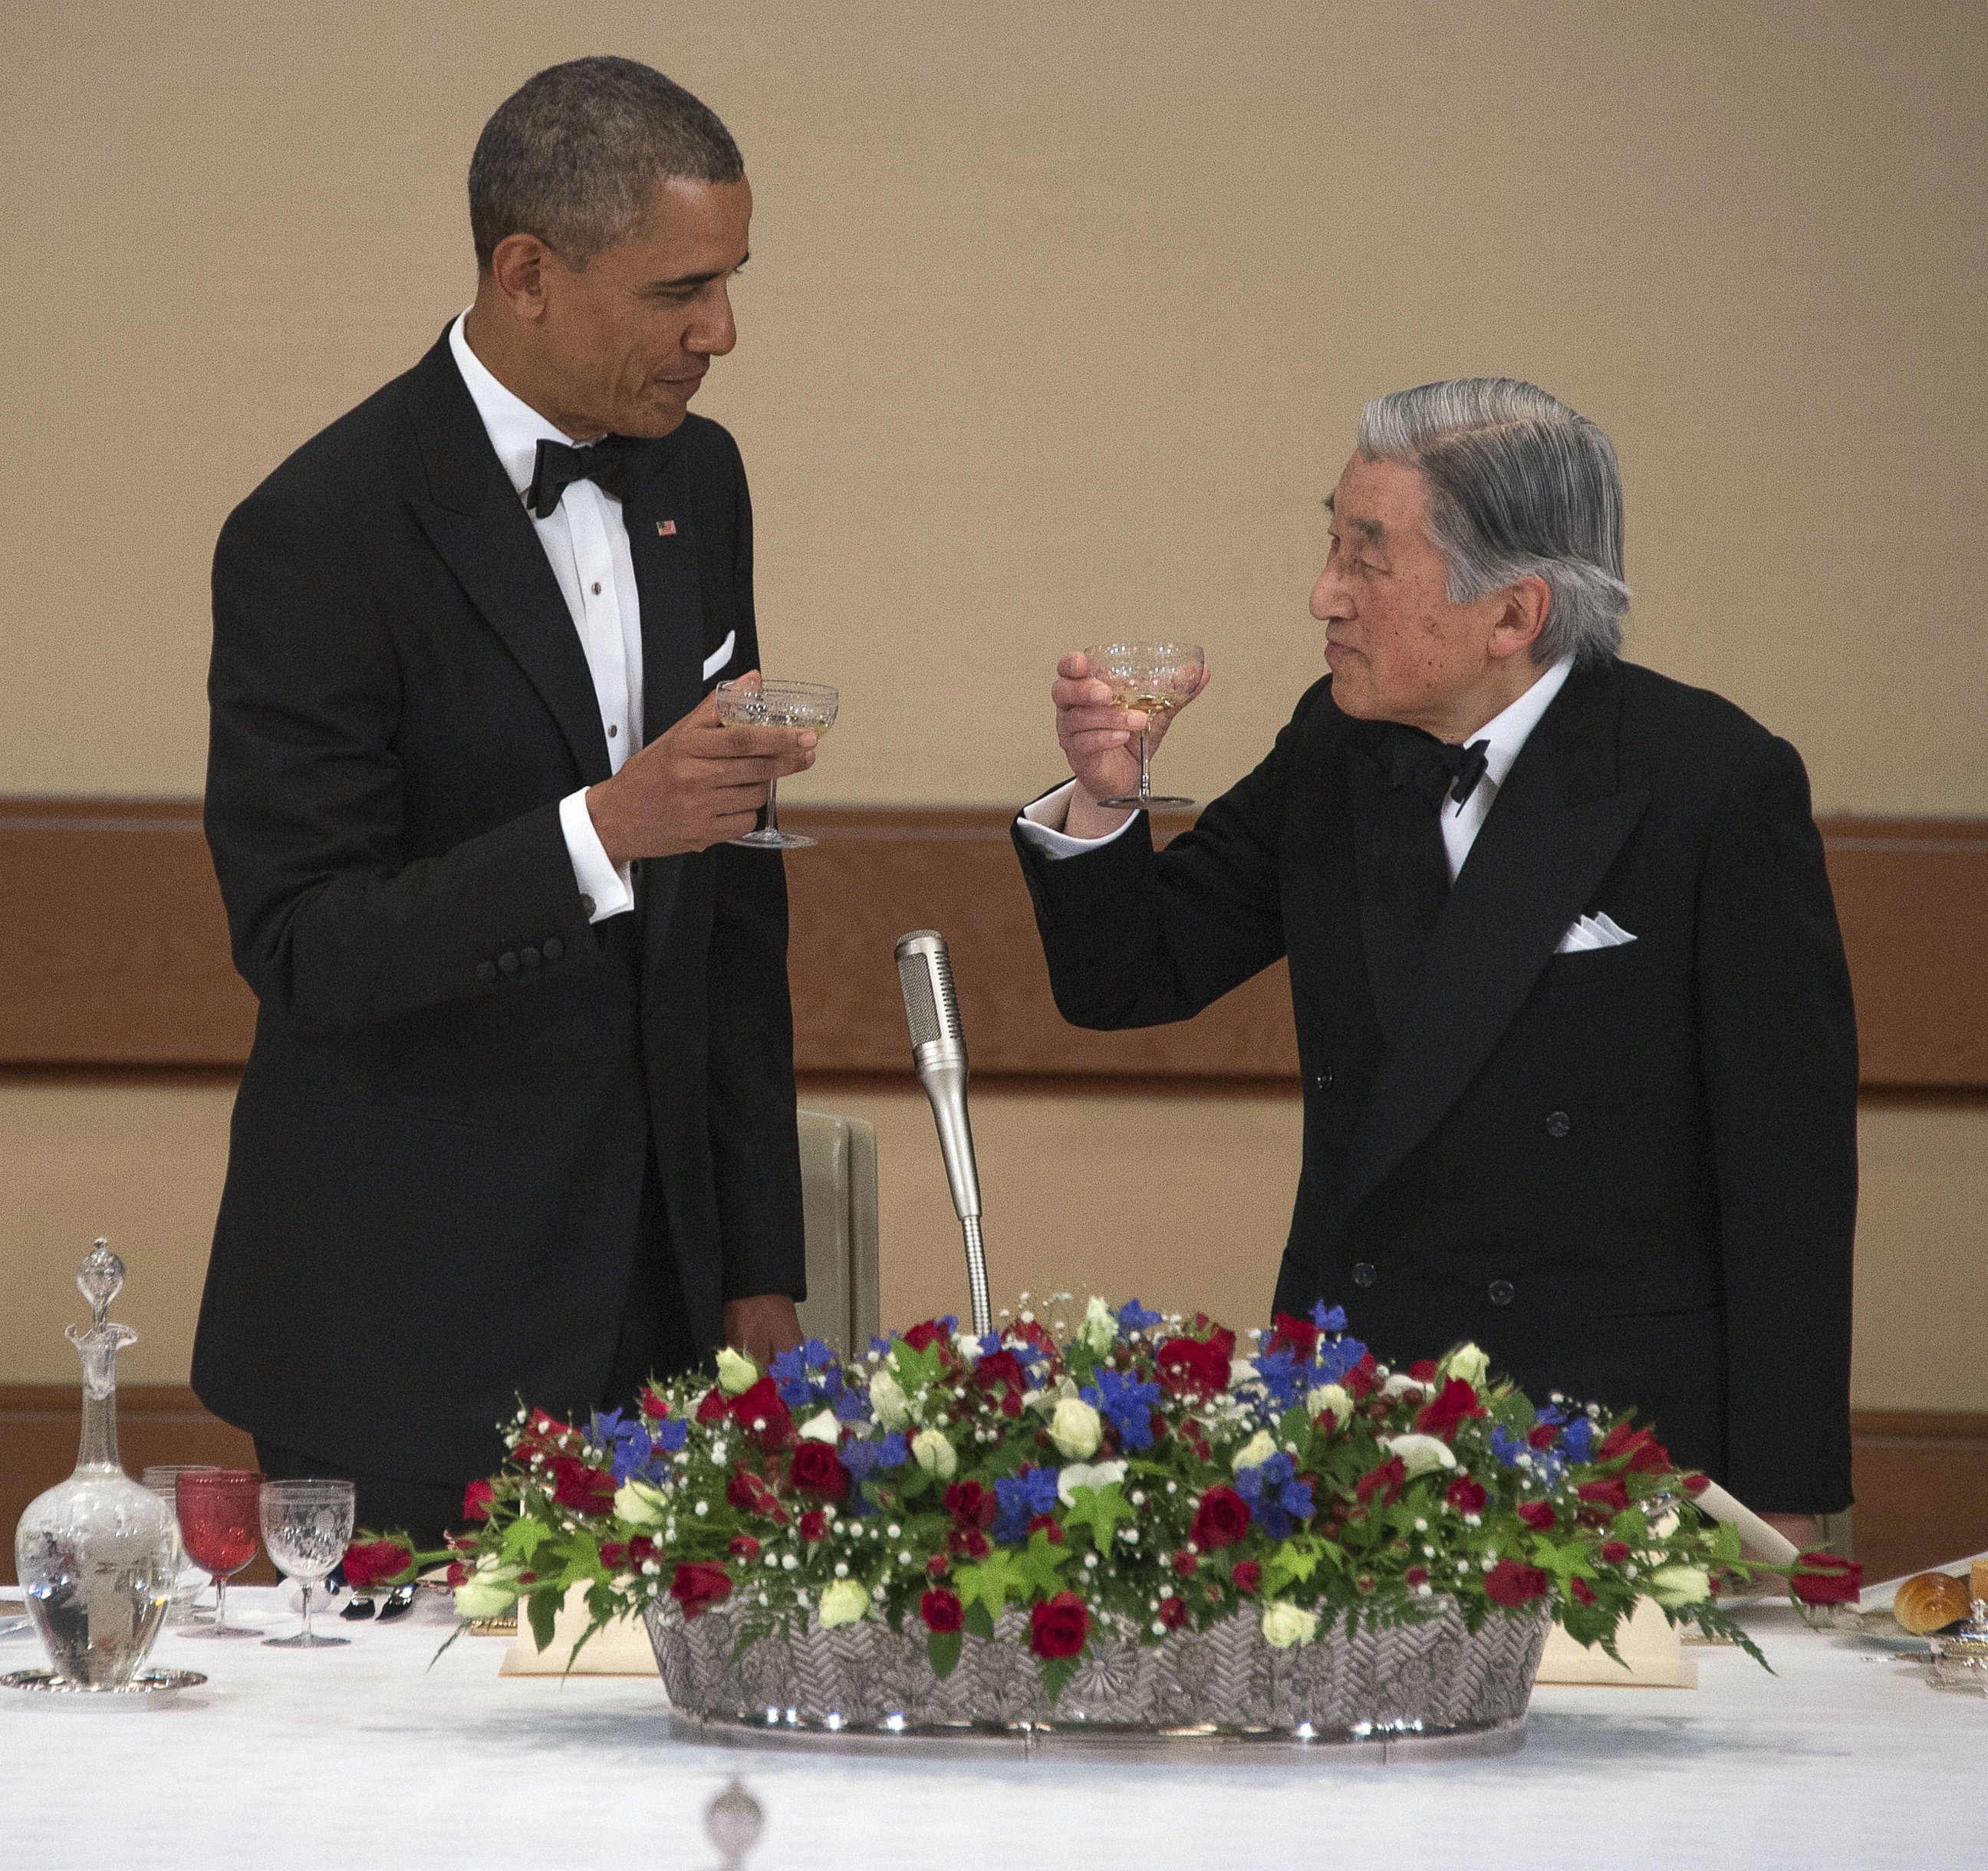 PHOTO: US President Barack Obama (L) toasts with Japanese Emperor Akihito (R) during the official state dinner at the Imperial Palace in Tokyo, April 24, 2014. 